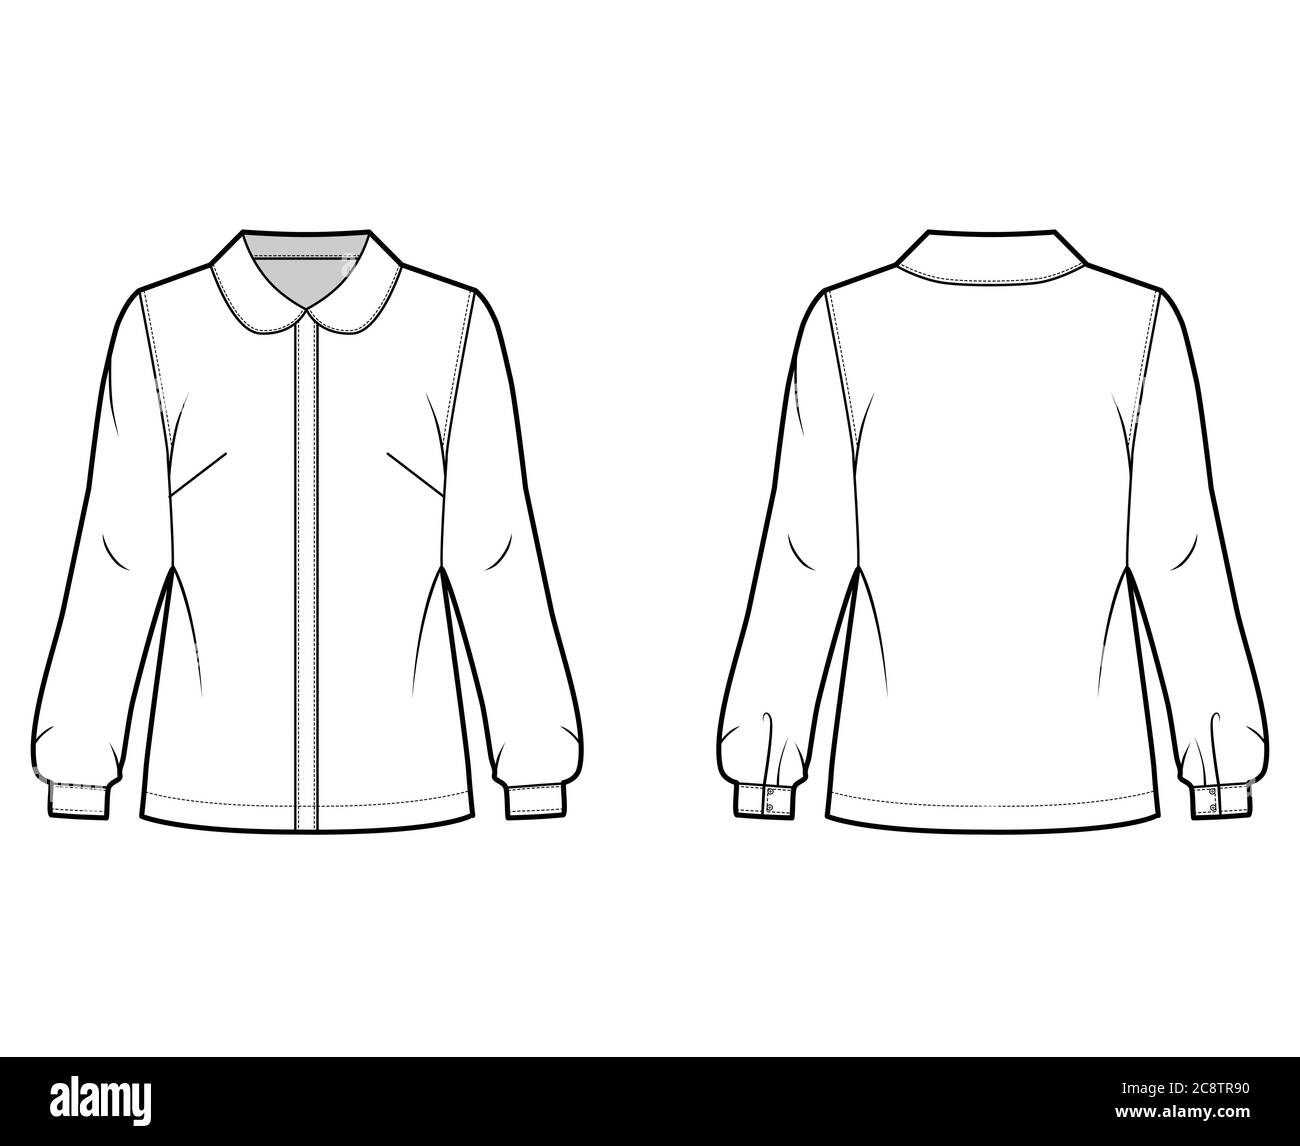 Round collar shirt technical fashion illustration with loose silhouette, long sleeve with cuff, front button fastening. Flat apparel blouse template front back white color. Women, men unisex top CAD Stock Vector